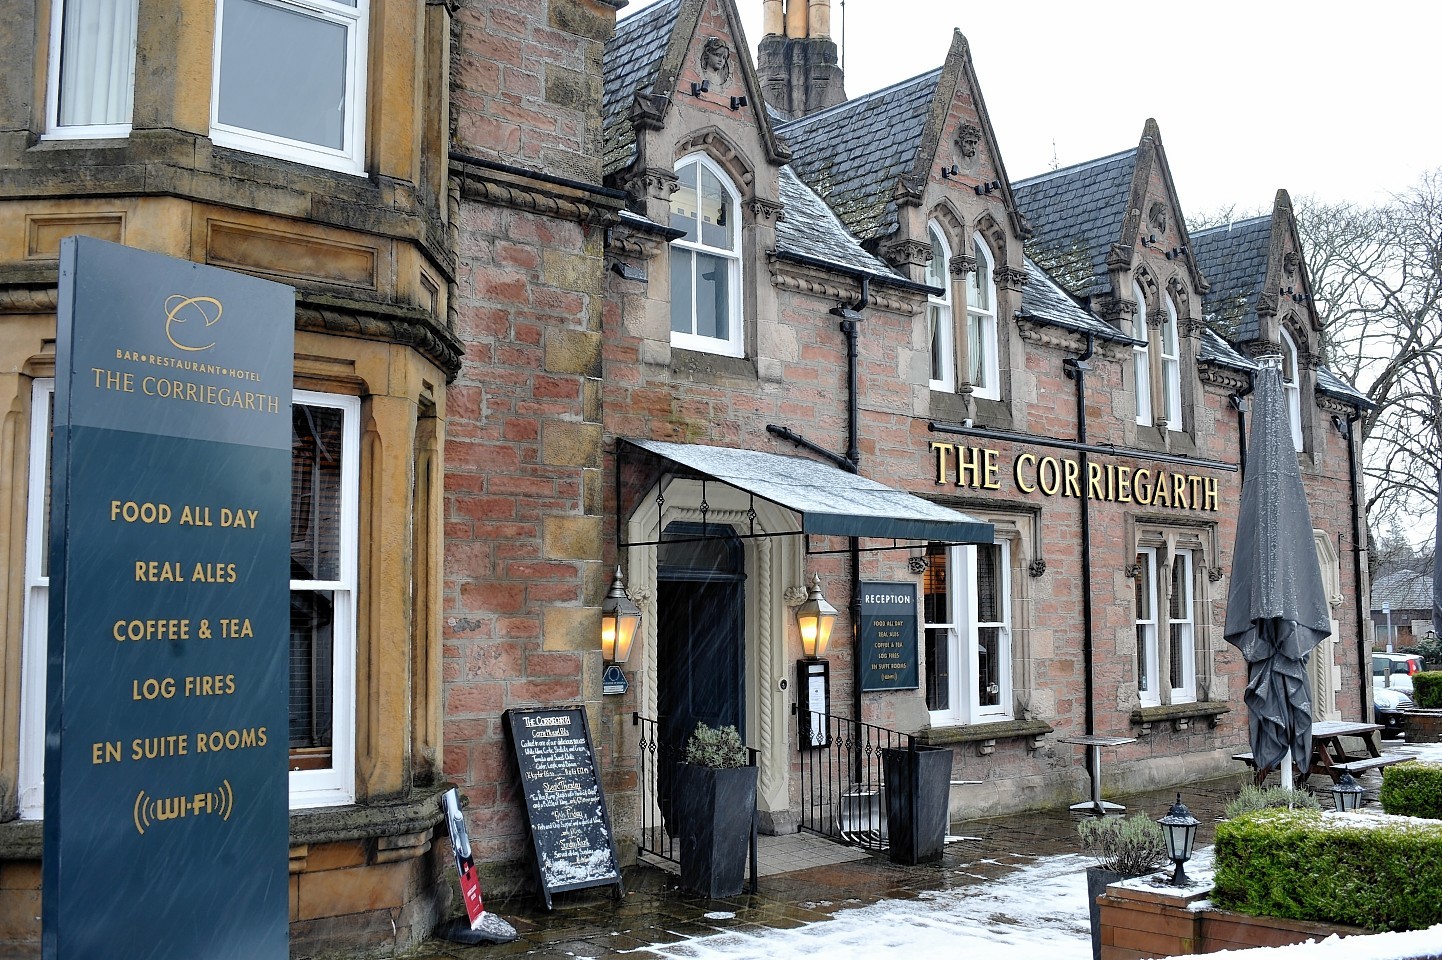 Corriegarth Hotel has been granted an extended license despite objections